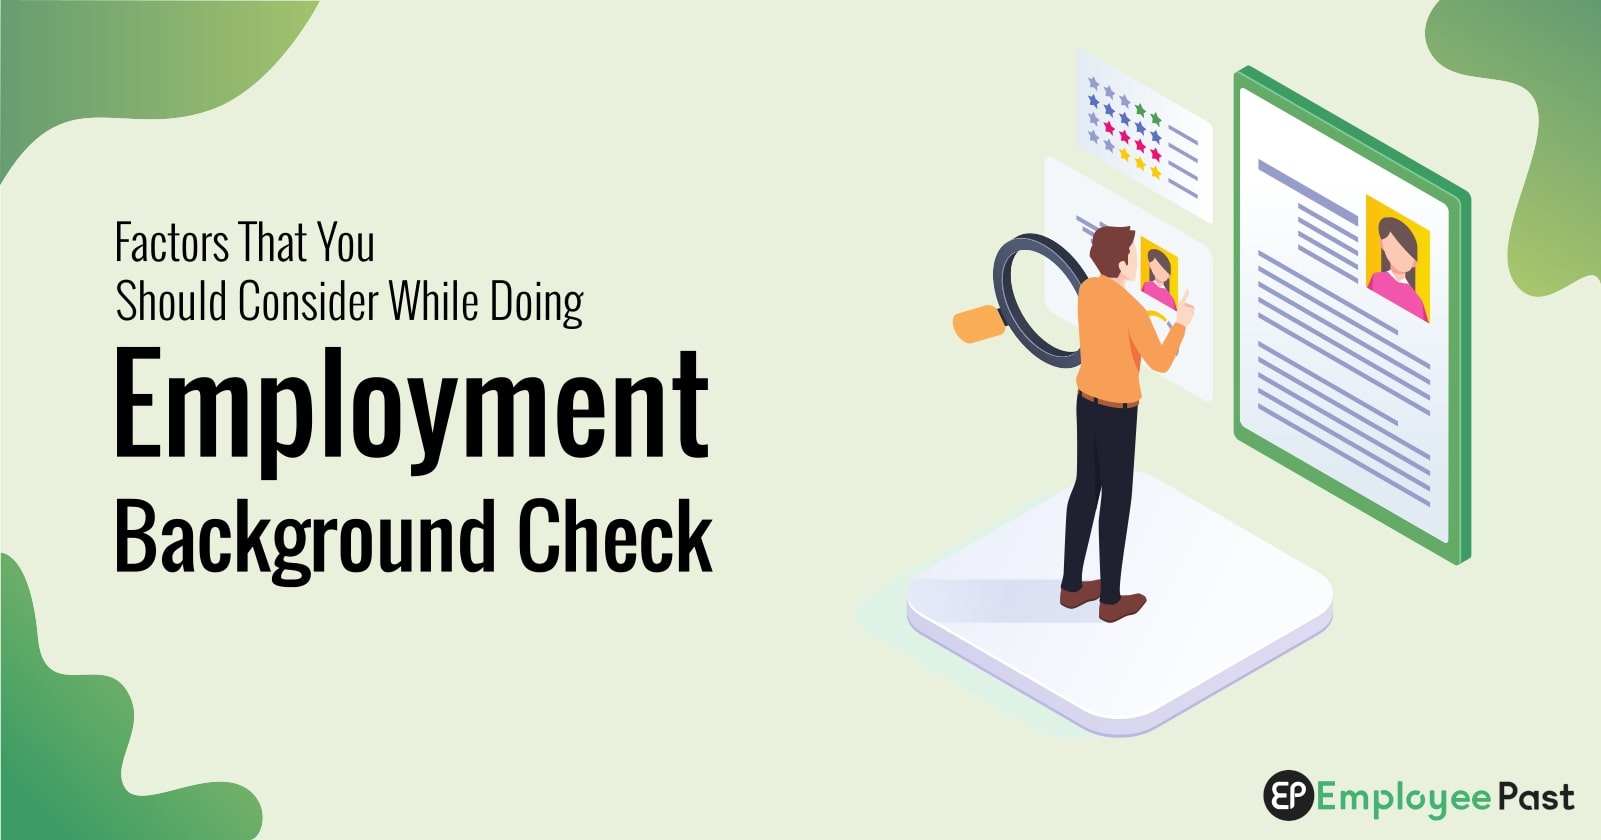 Factors That You Should Consider While Doing Employment Background Check